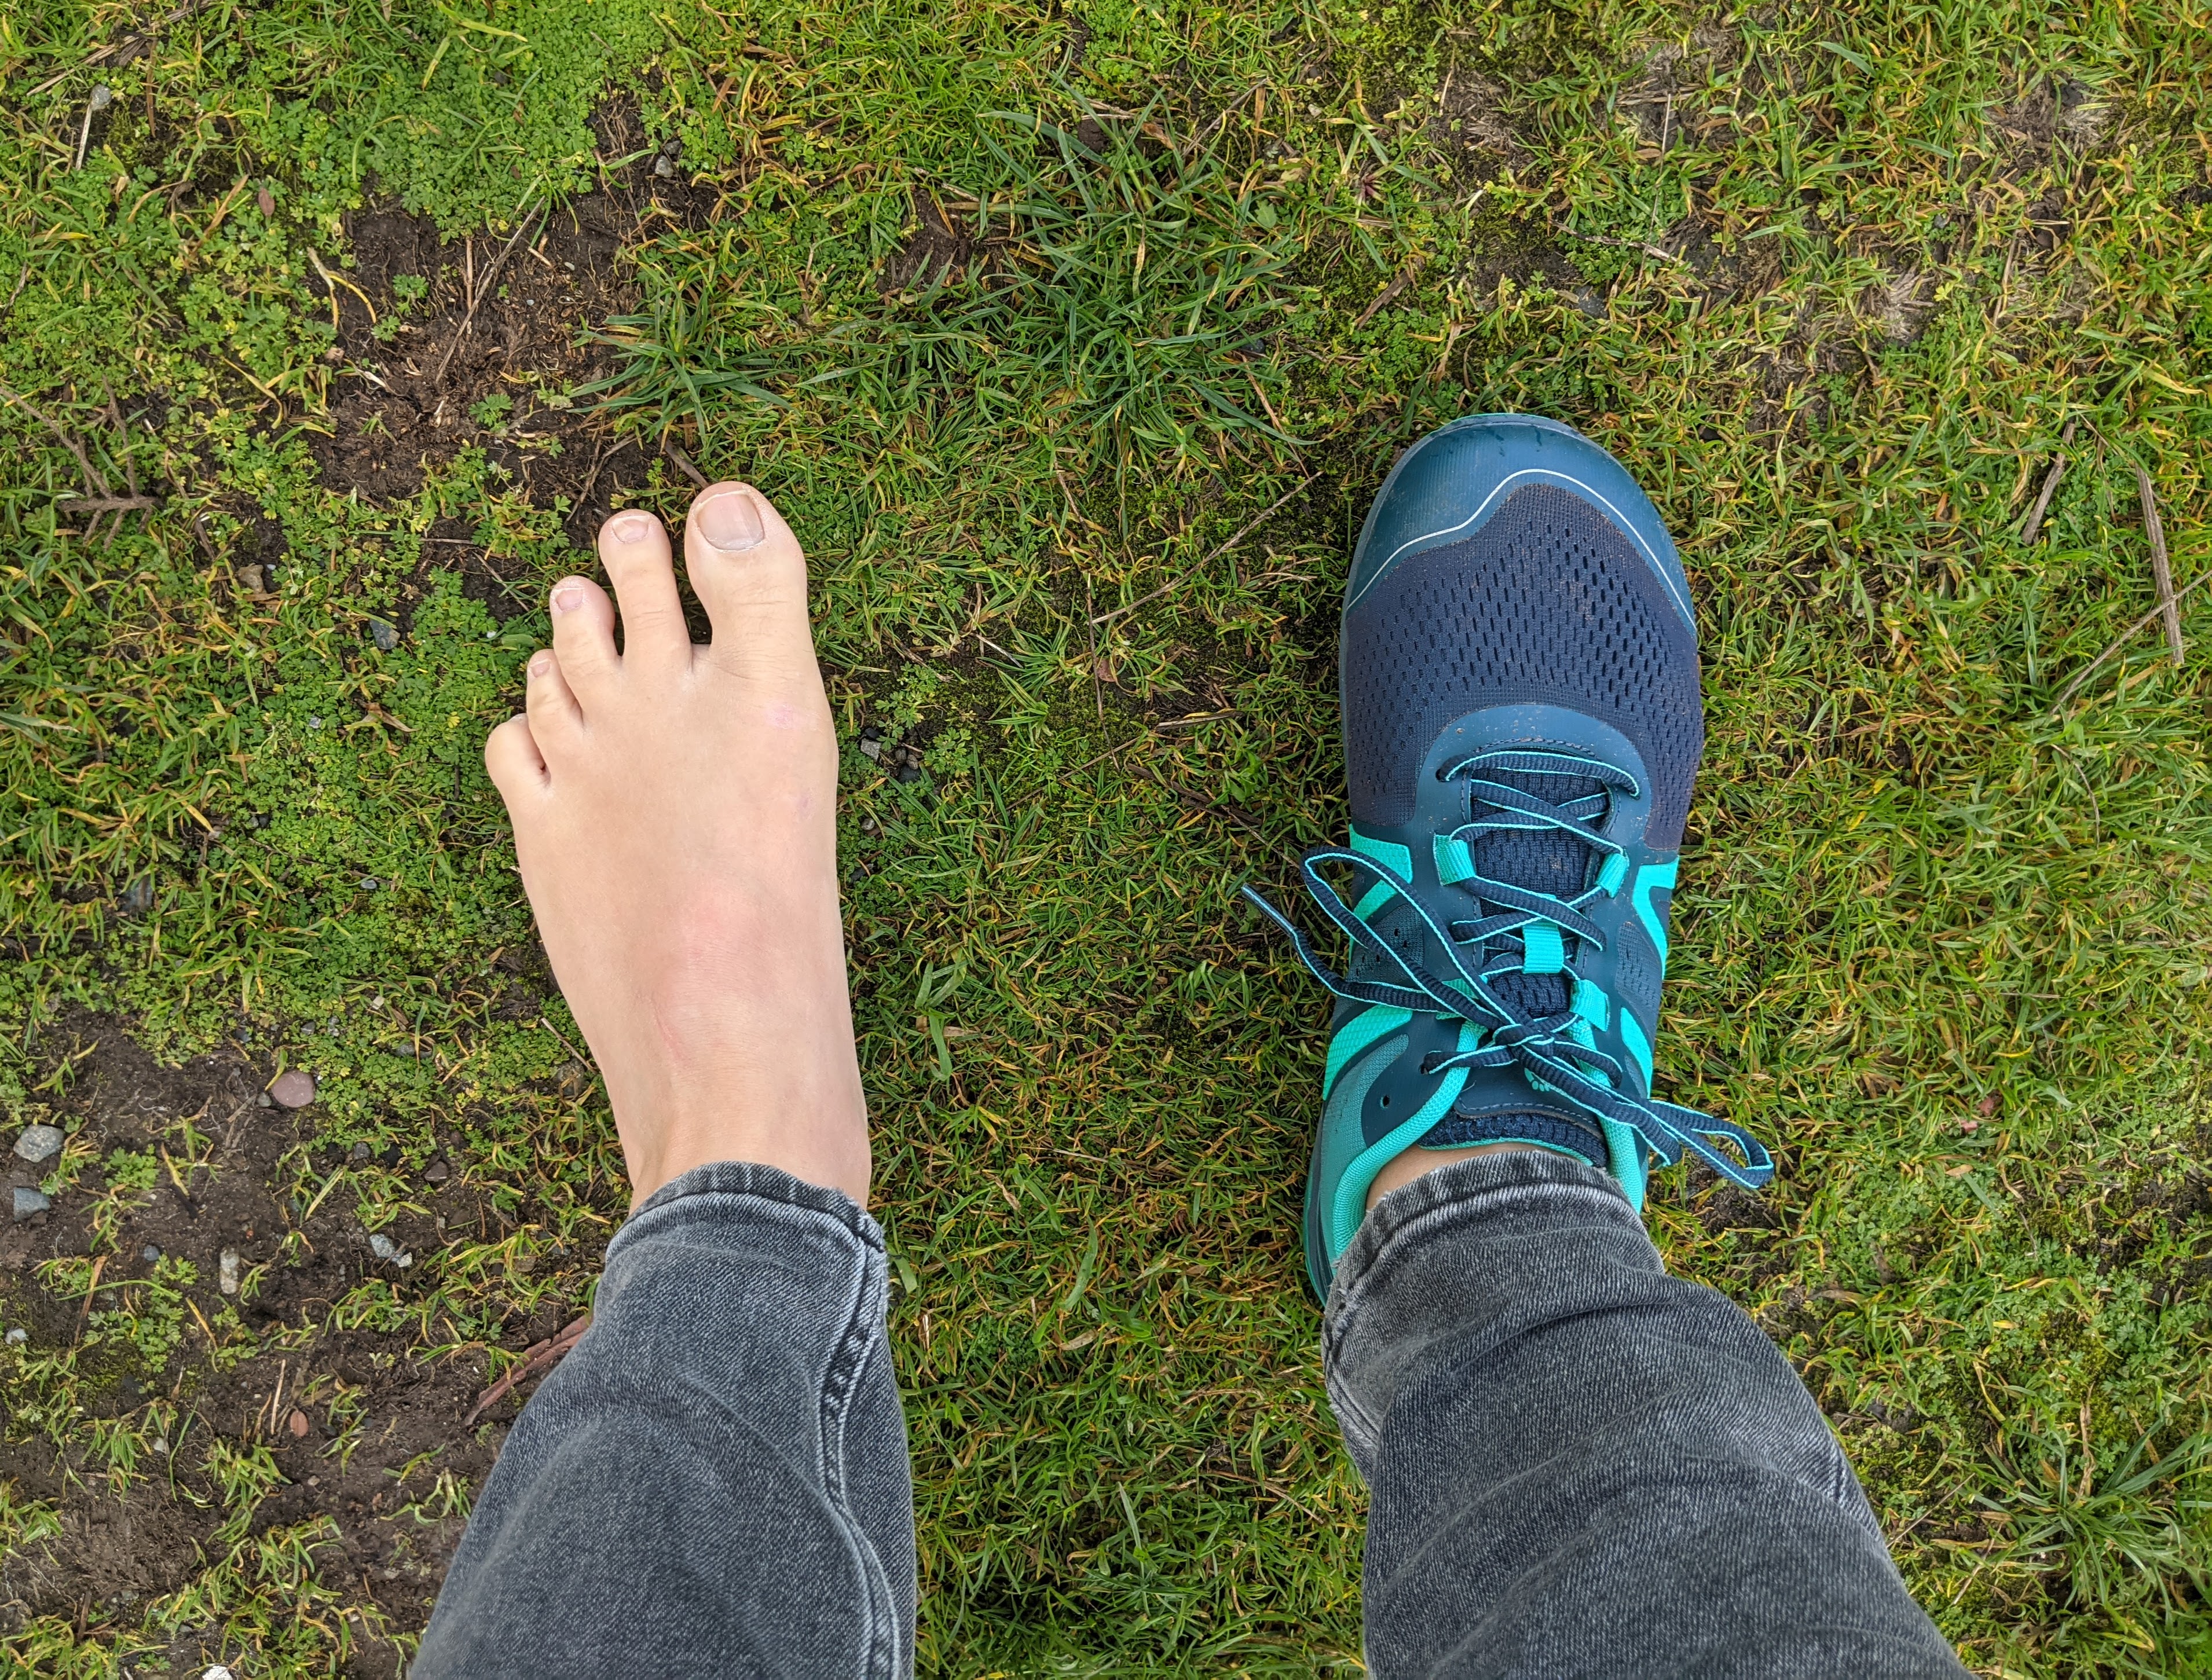 Barefoot walking isn't safe, experts say, but some people don't care